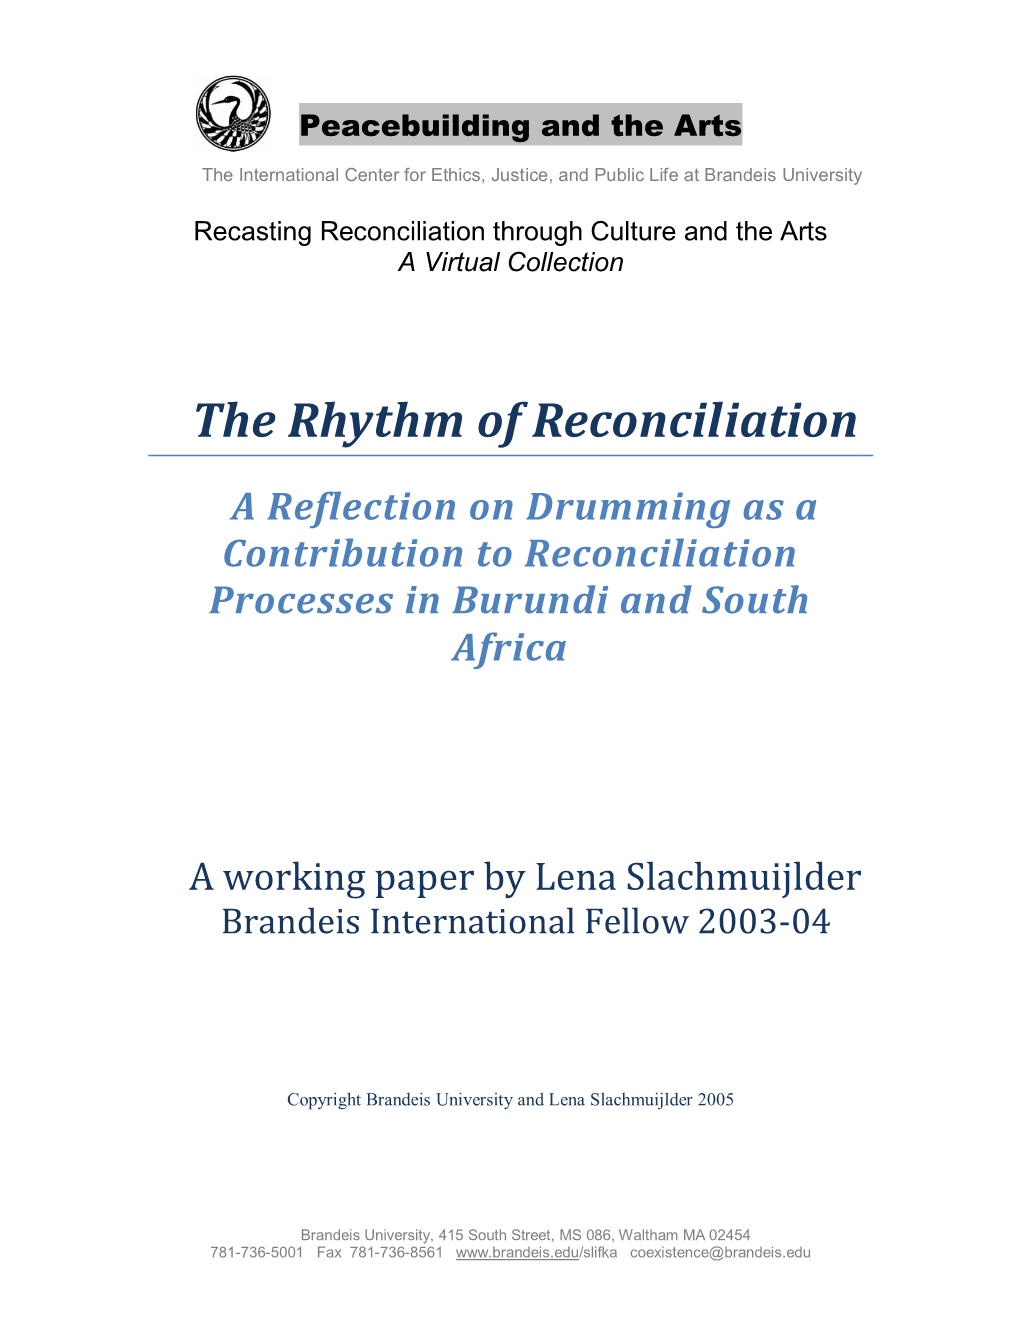 The Rhythm of Reconciliation: Ritual Possibilities for Reconciliation Through Drumming